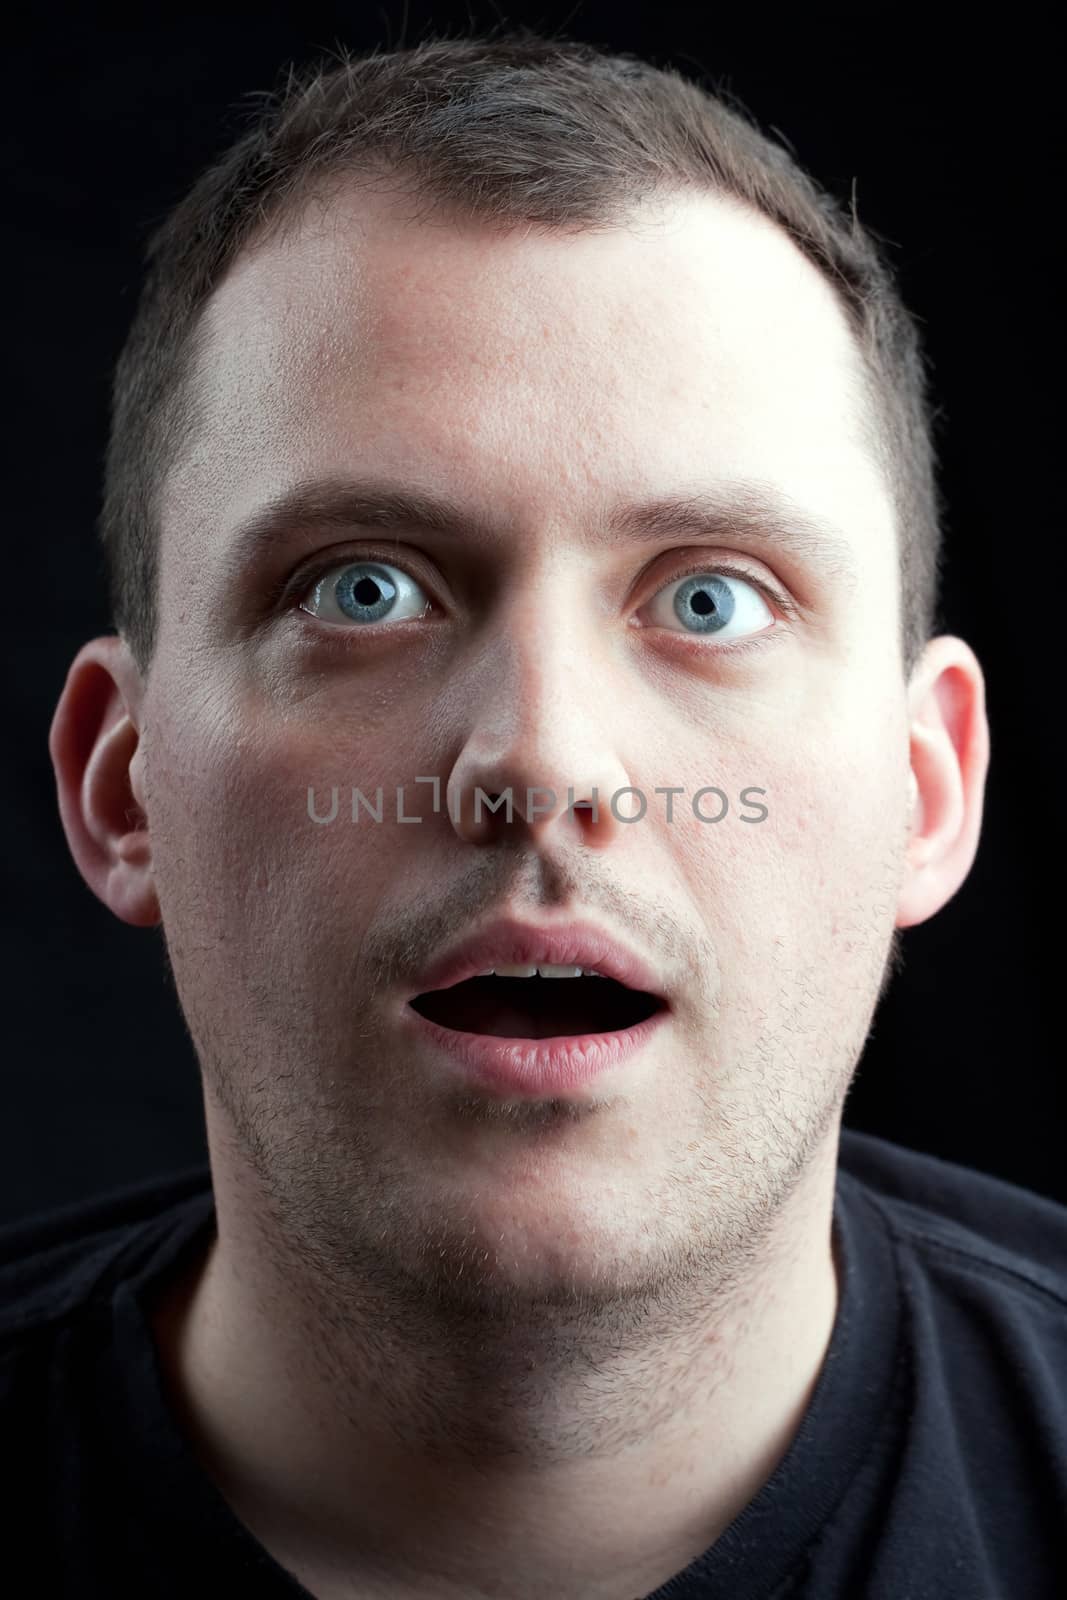 A shocked or surprised middle aged man over a dark background.